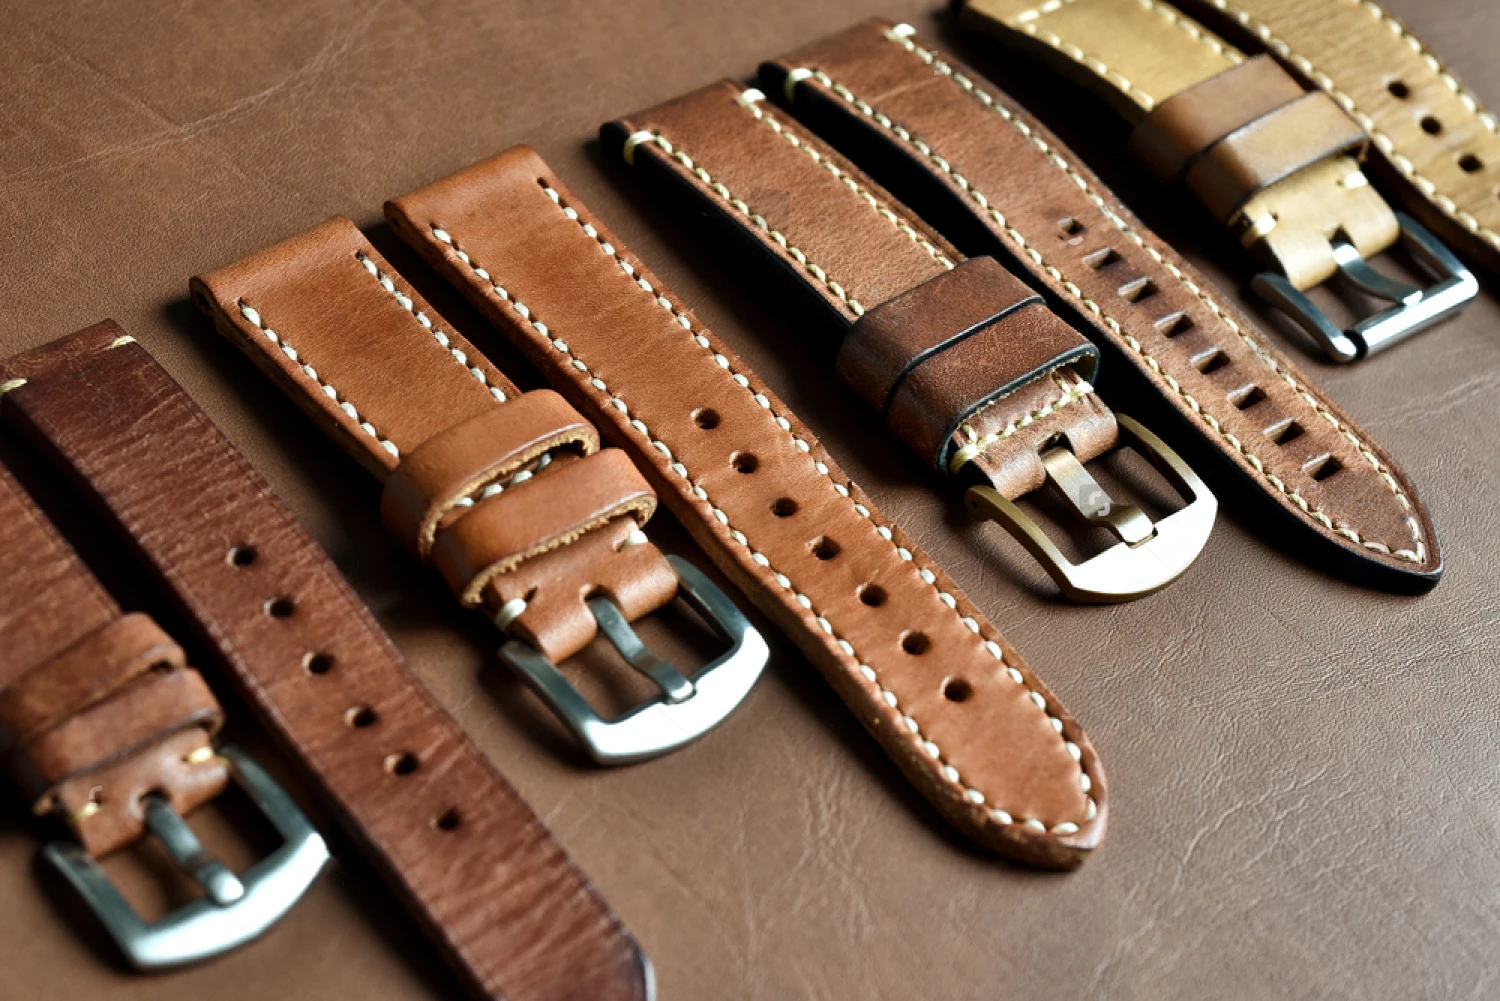 leather watch band strap compatible with all model F-r-e-d-e-r-i-q-u-e constant strap FCS-HBL23X18/FCS-WHNW21X18/FCS-SDGREY18X16 enlarge